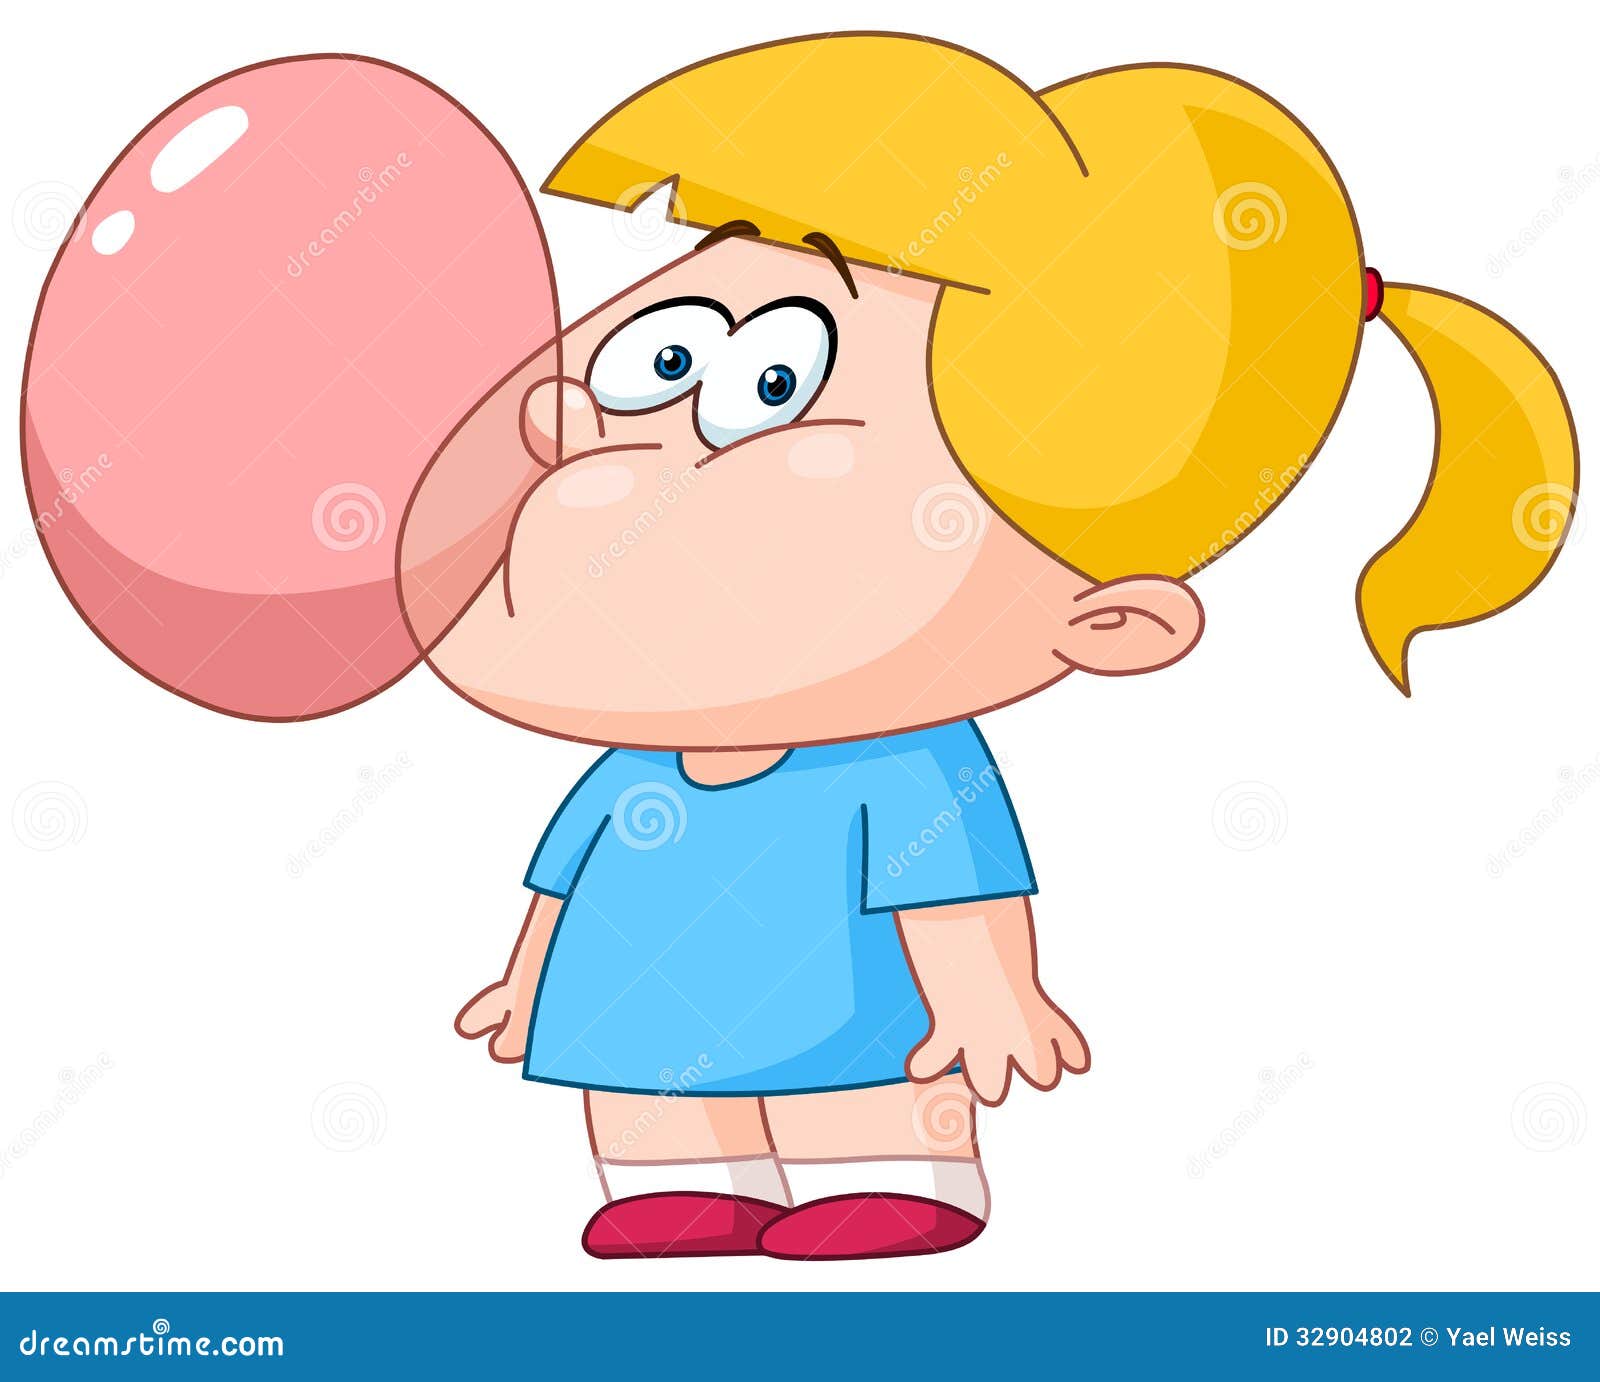 Girl Blowing Bubble From Gum Stock Photography - Image: 32904802